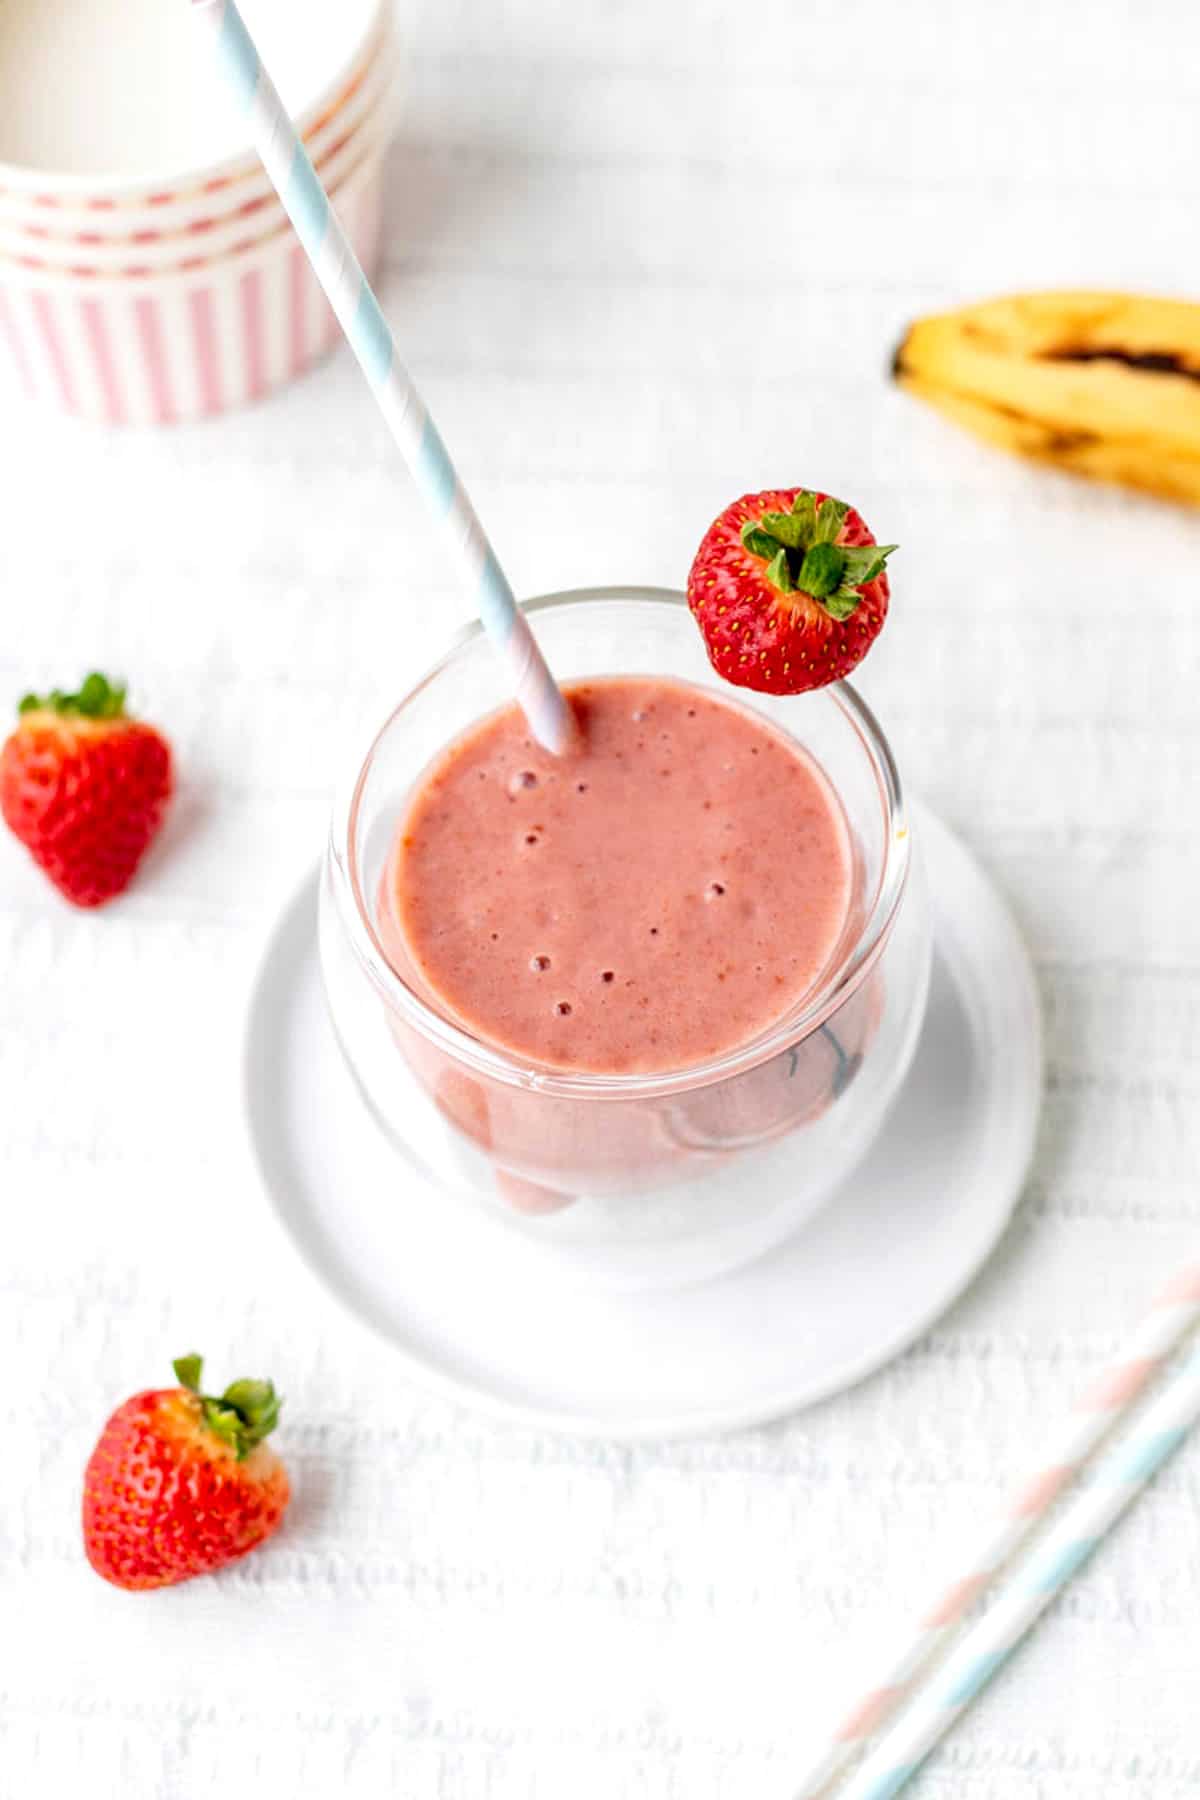 The creamy strawberry banana smoothie in a glass with a strawberry and straw.